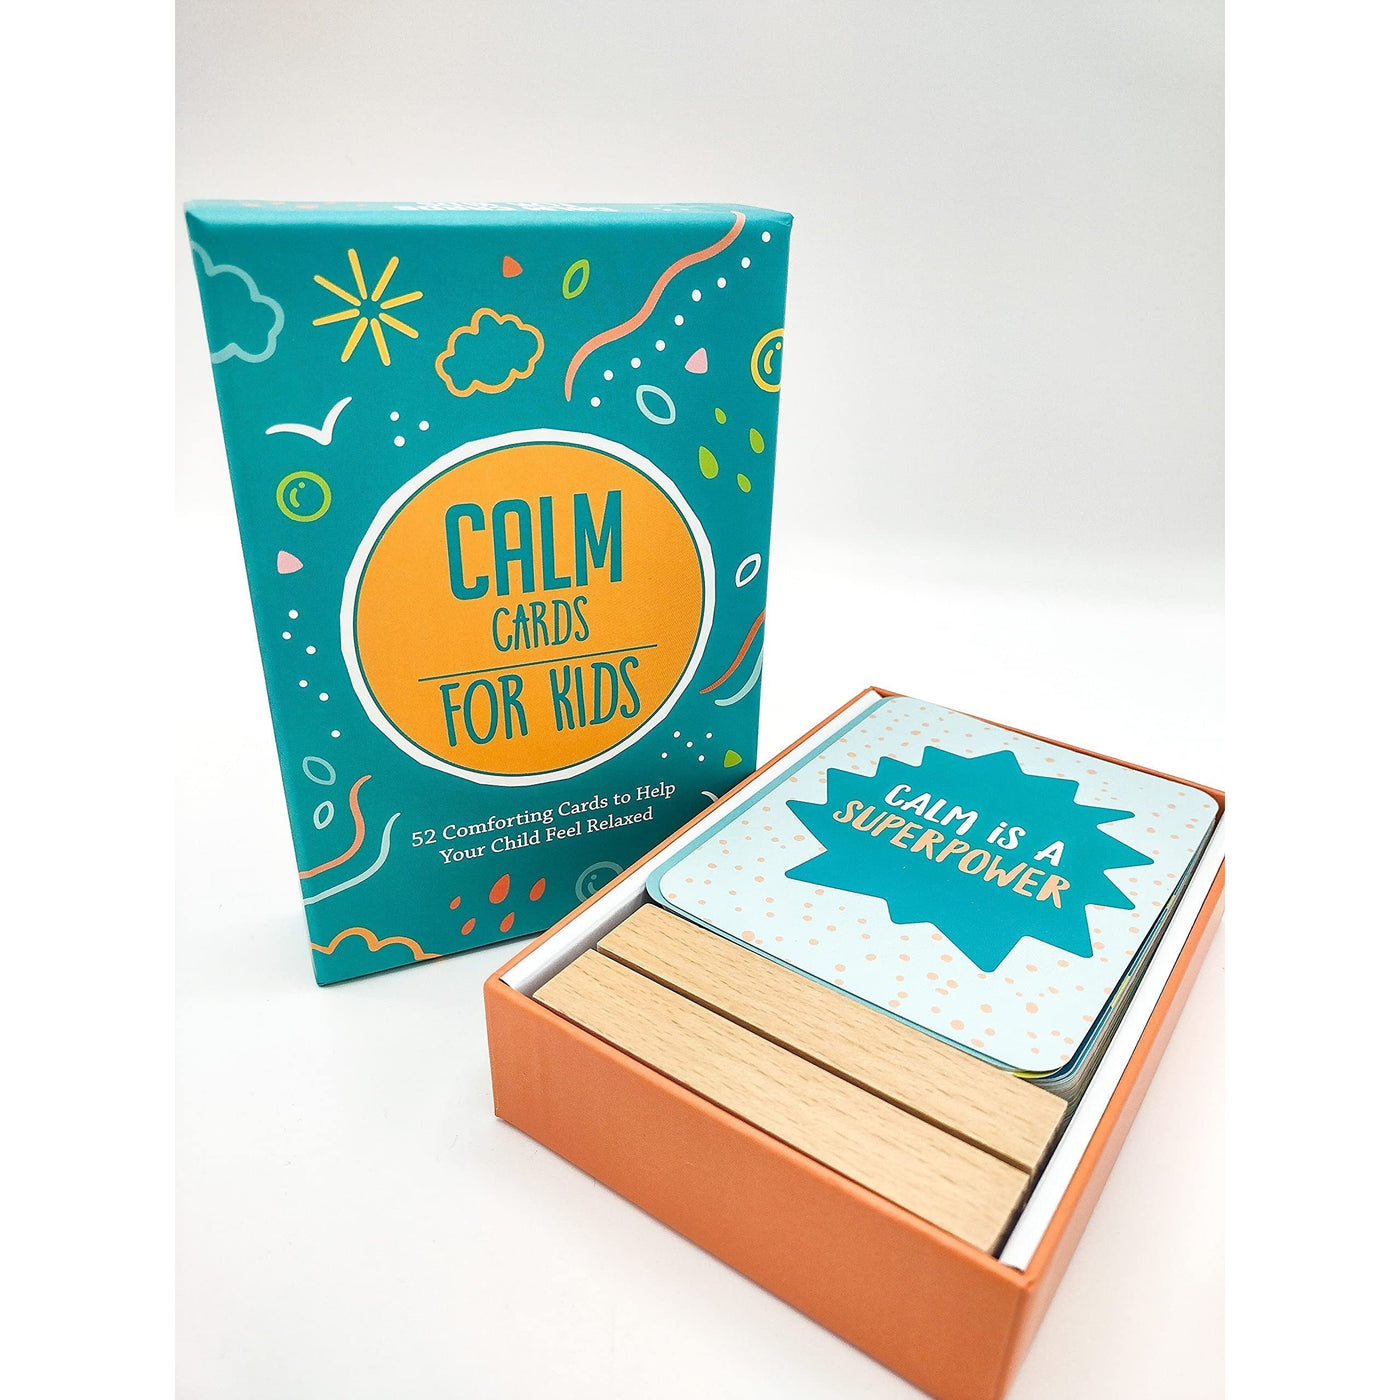 Calm Cards for Kids: 52 Comforting Cards to Help Your Child Feel Relaxed